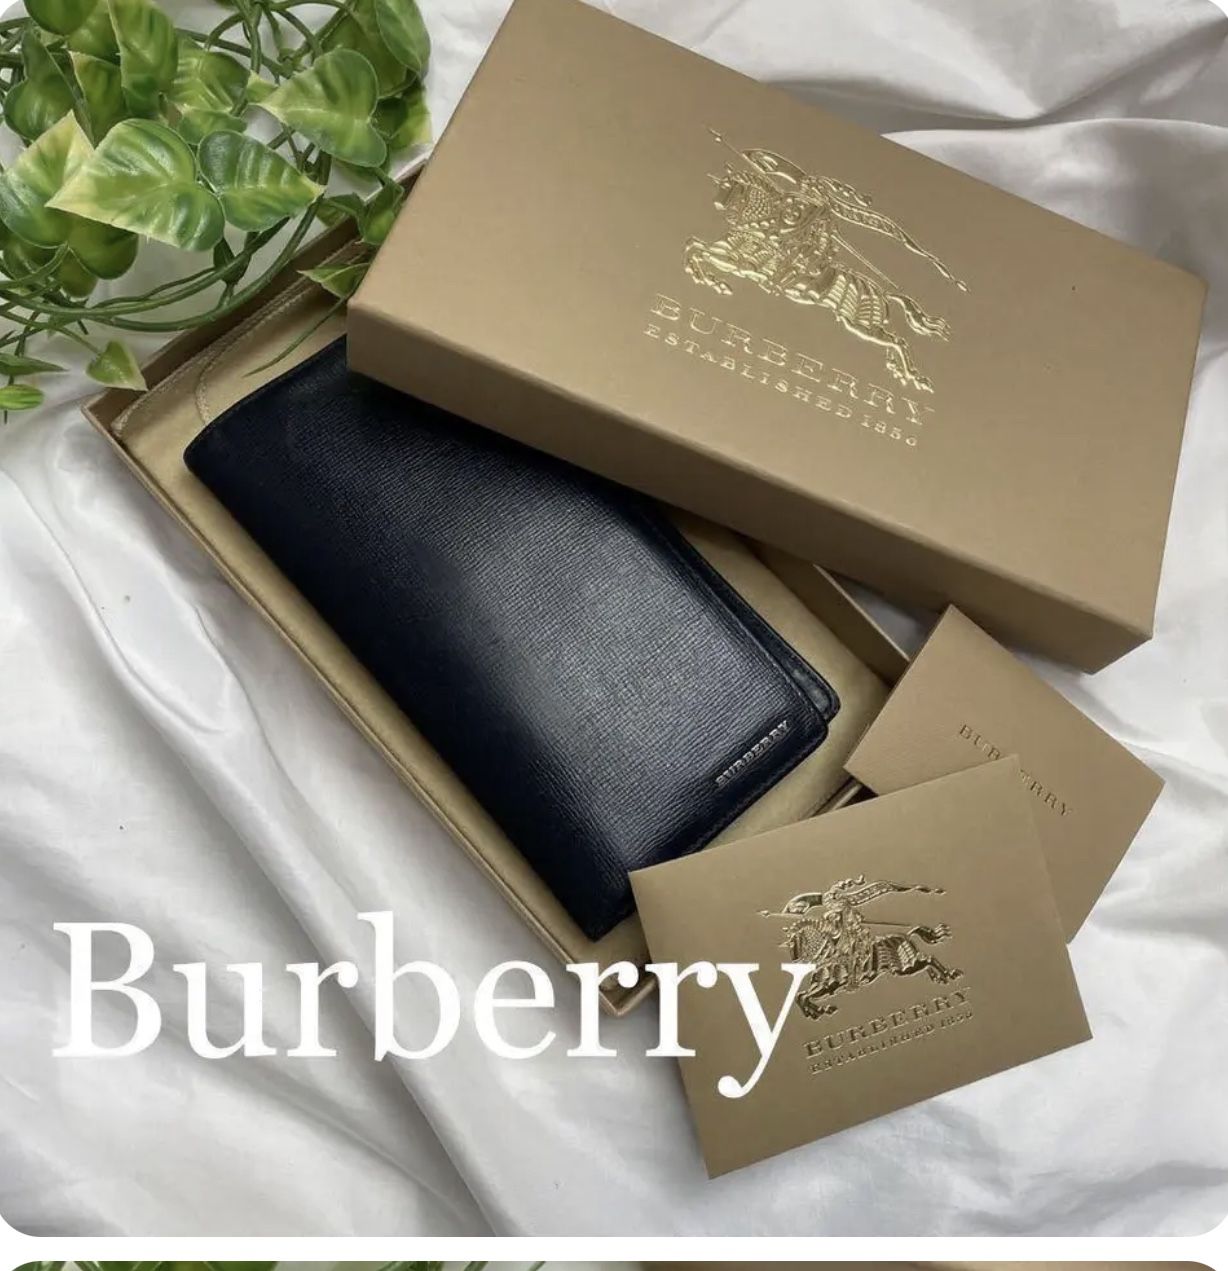 Burberry Leather Wallet With Box Like New 